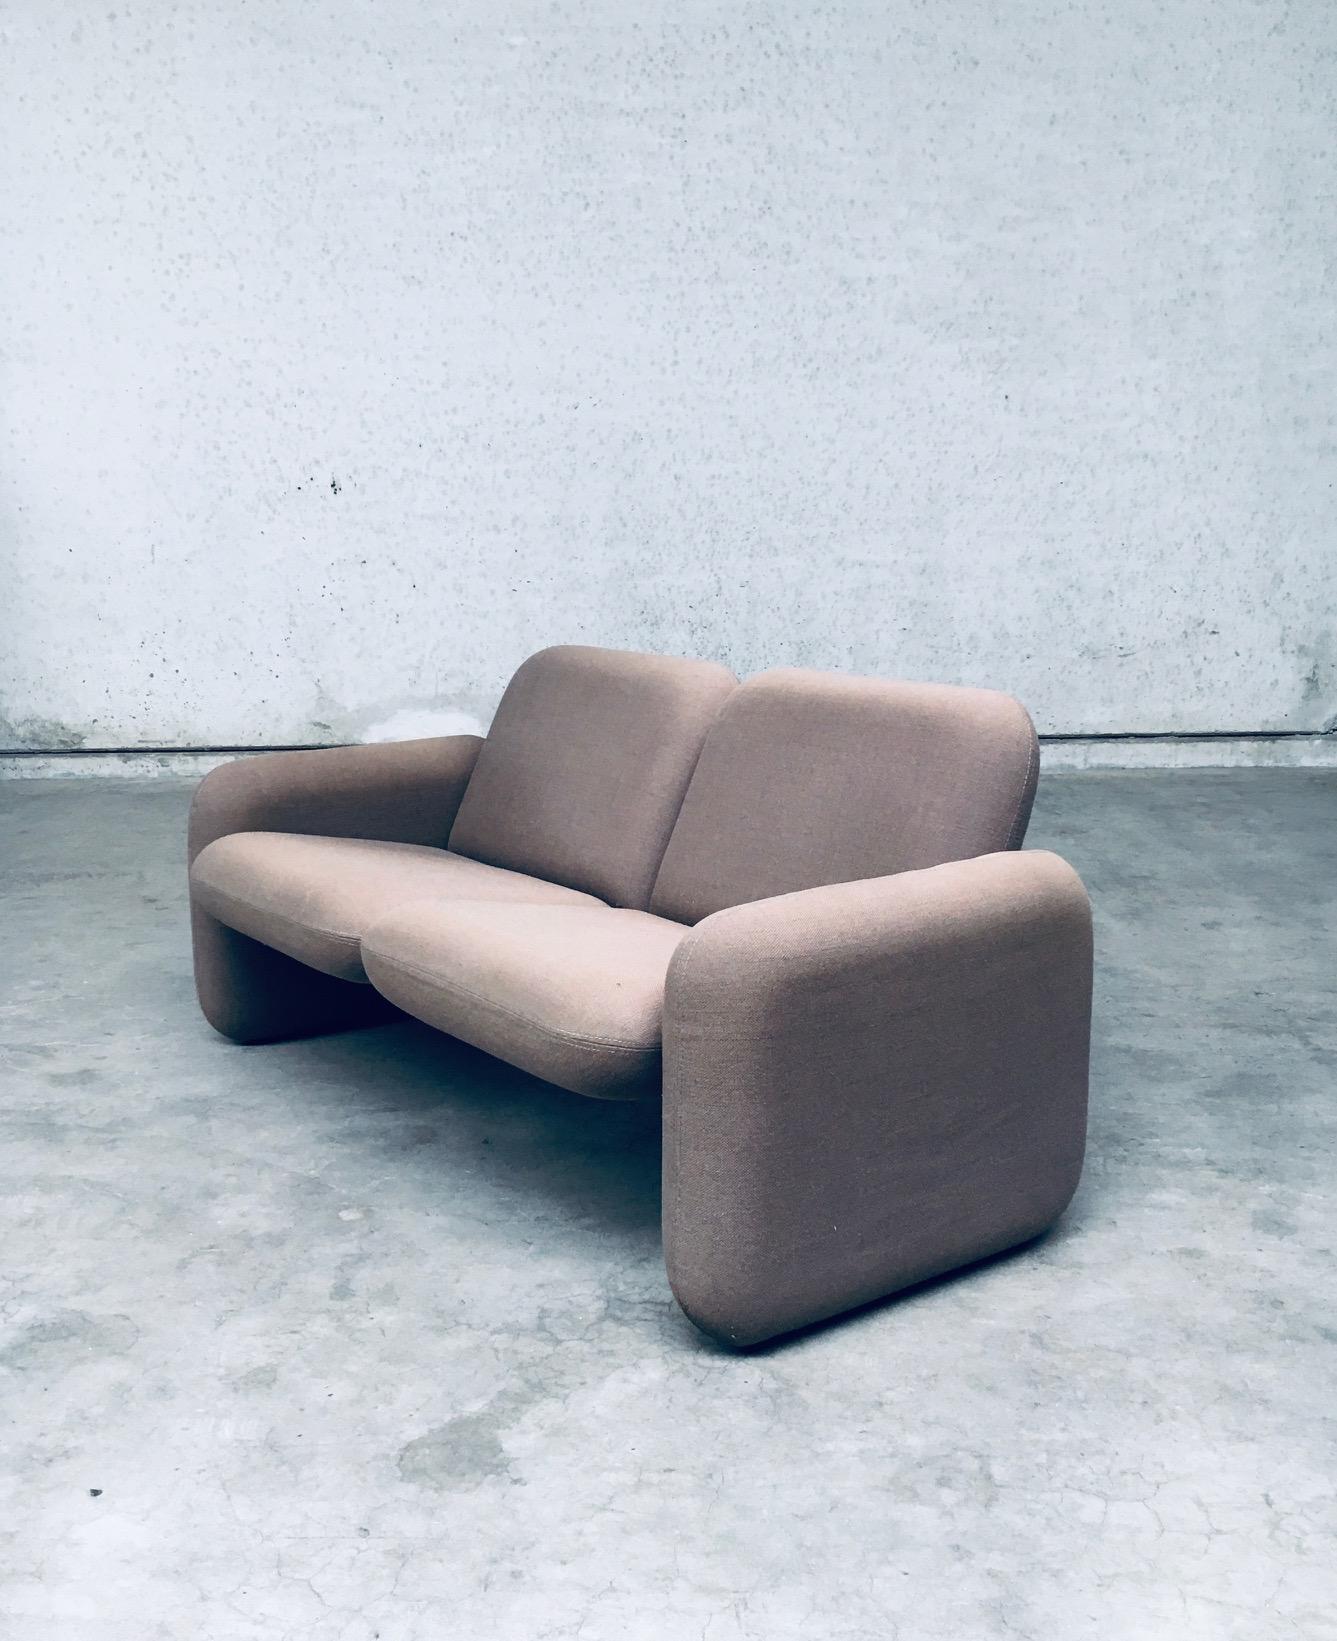 Late 20th Century Vintage Iconic 1970s Chiclet Sofa by Ray Wilkes for Herman Miller